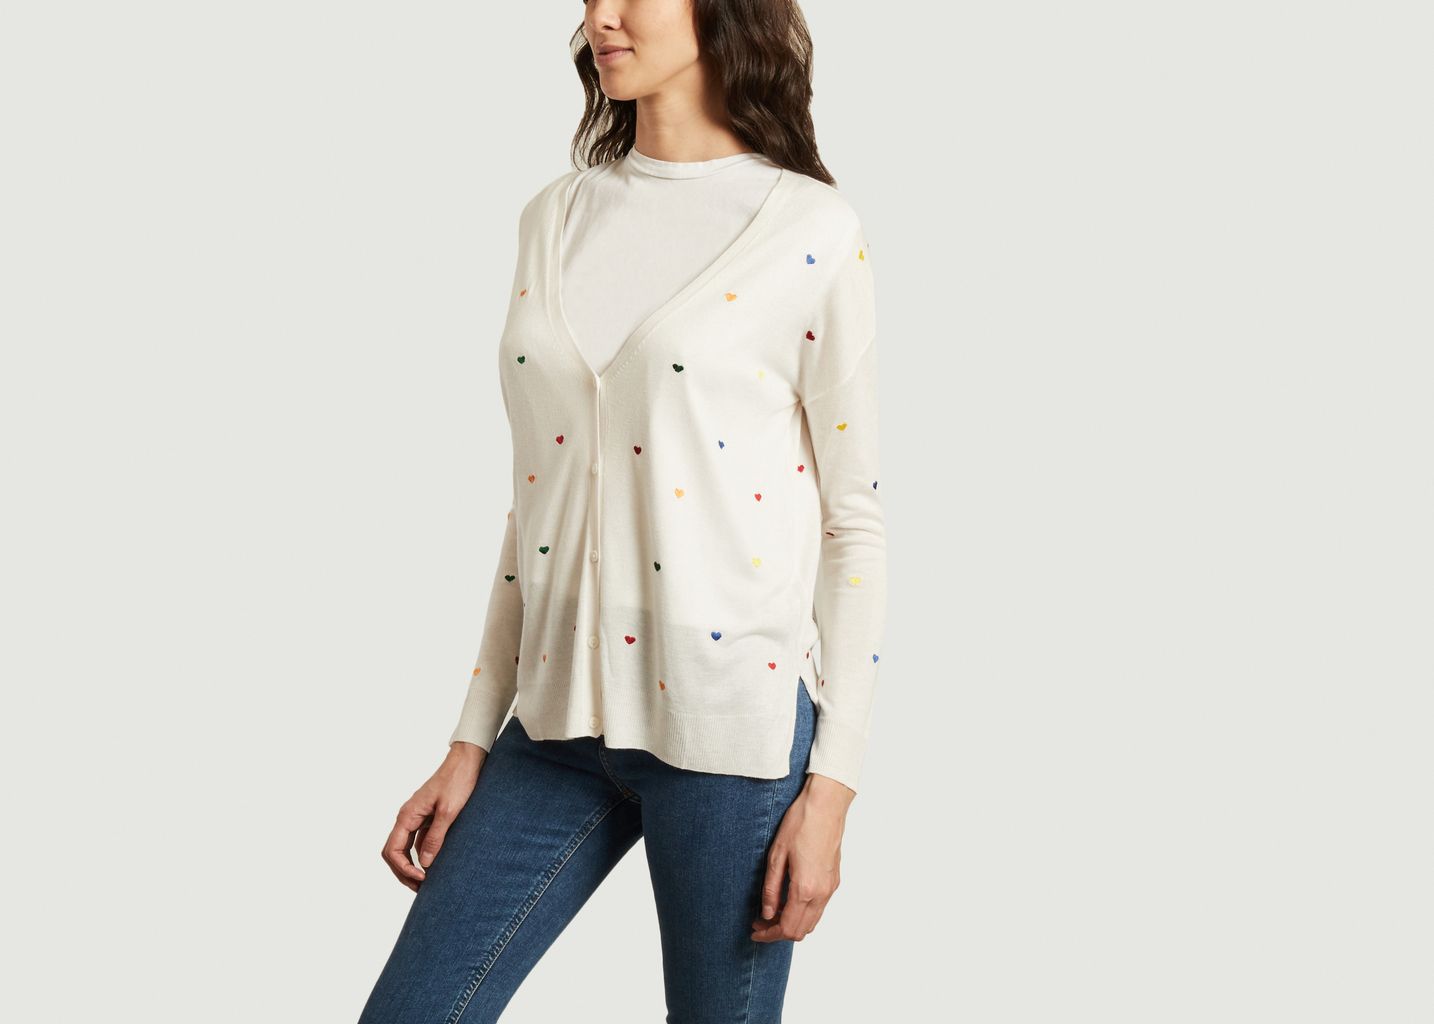 Cannelle bamboo and cashmere hearts pattern cardigan - Absolut cashmere